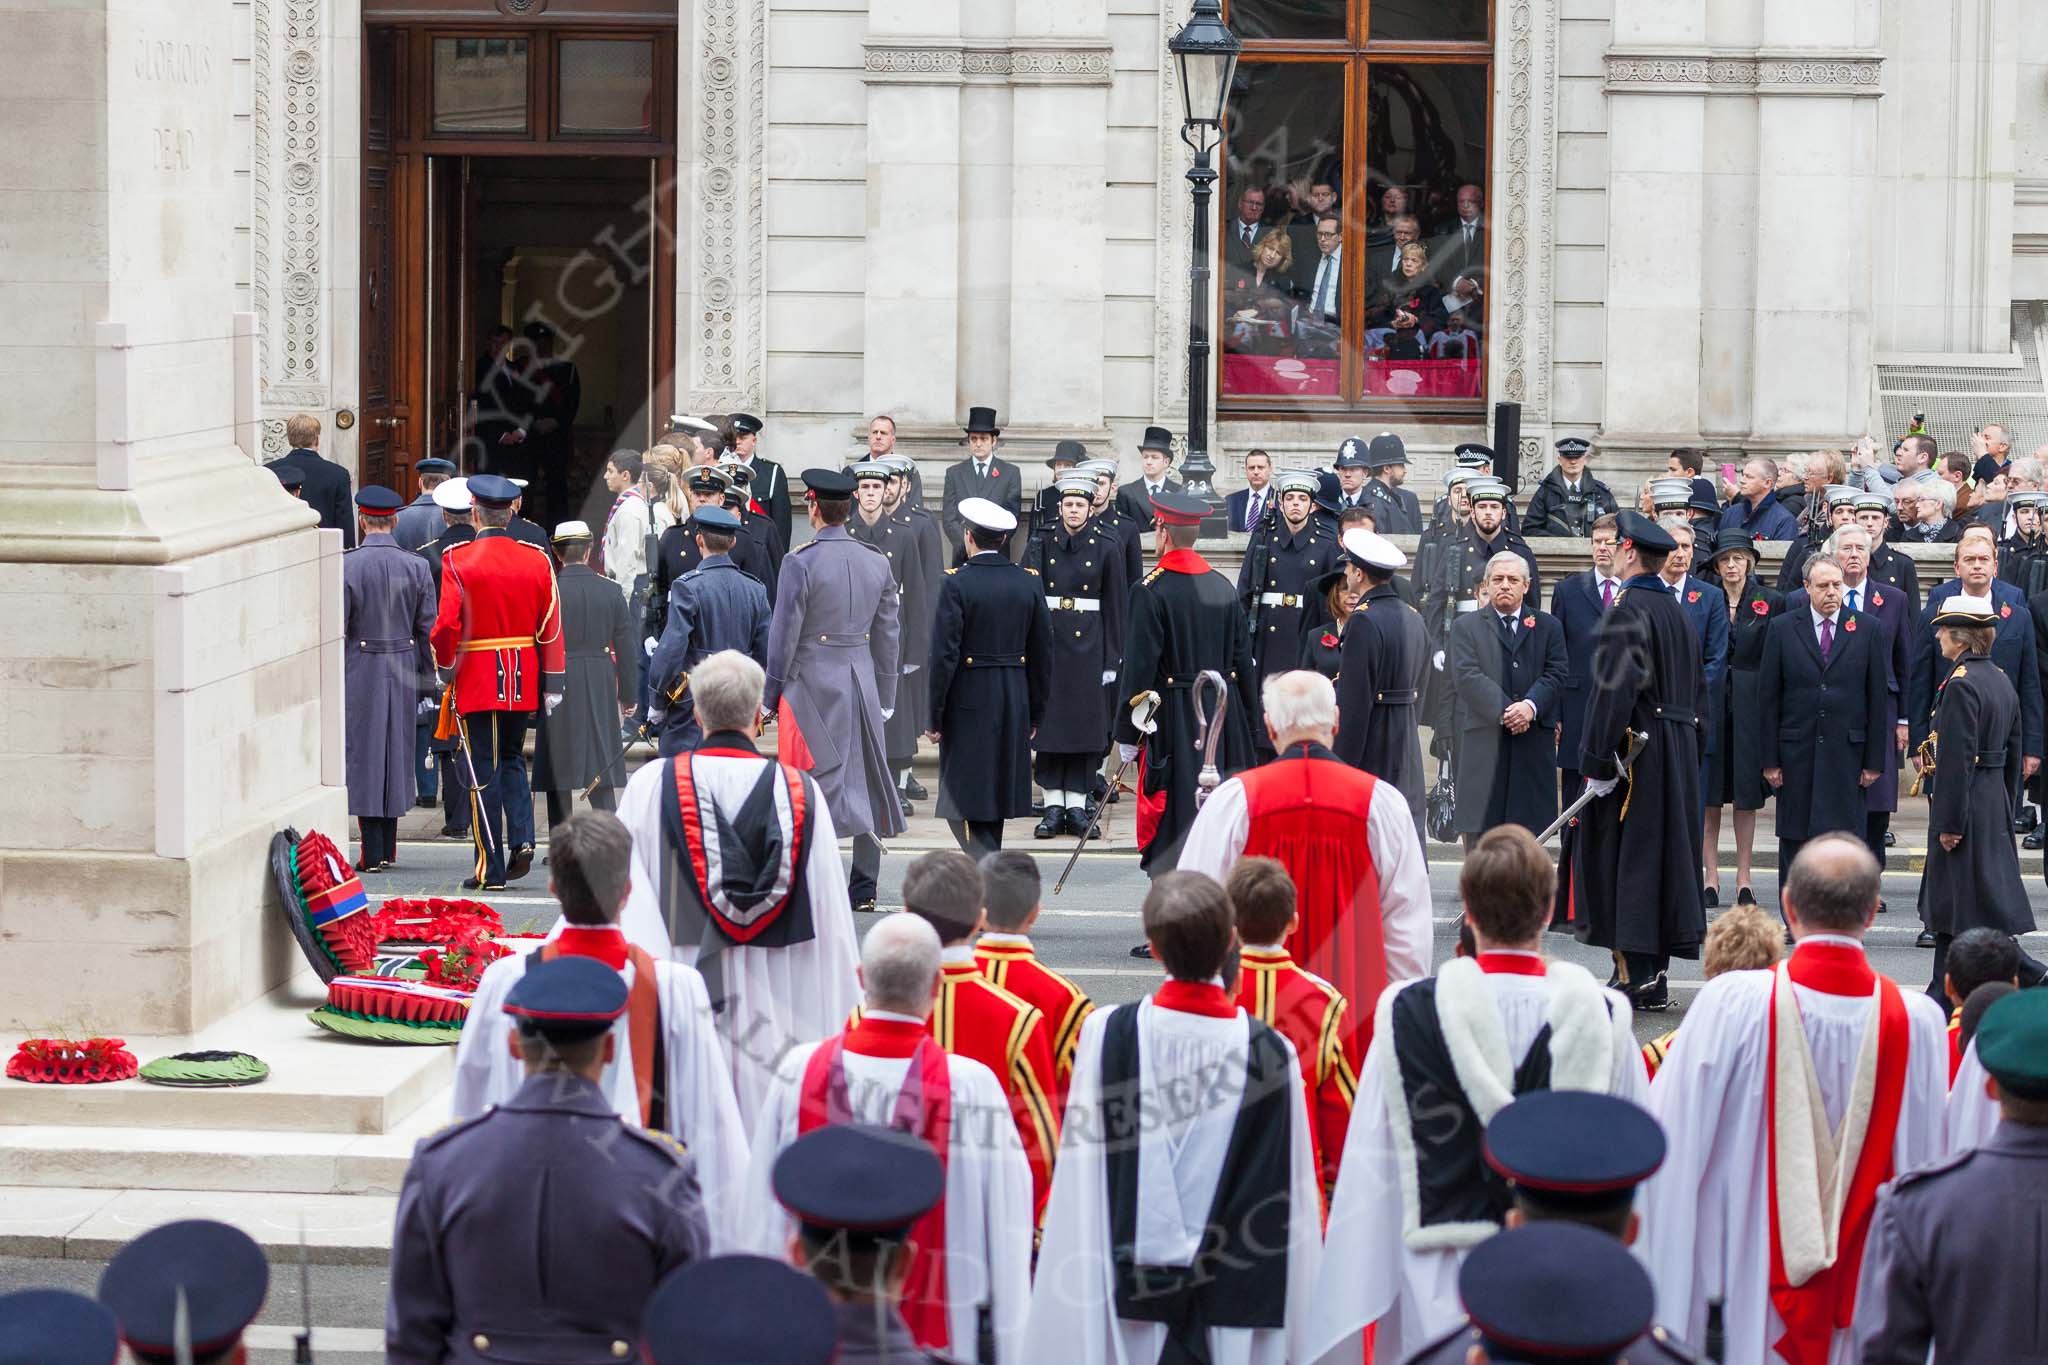 Remembrance Sunday at the Cenotaph 2015: After the official ceremont, the Royal Family and all the other participants move back into the Foreign- and Commonwealth Office. Image #316, 08 November 2015 11:19 Whitehall, London, UK